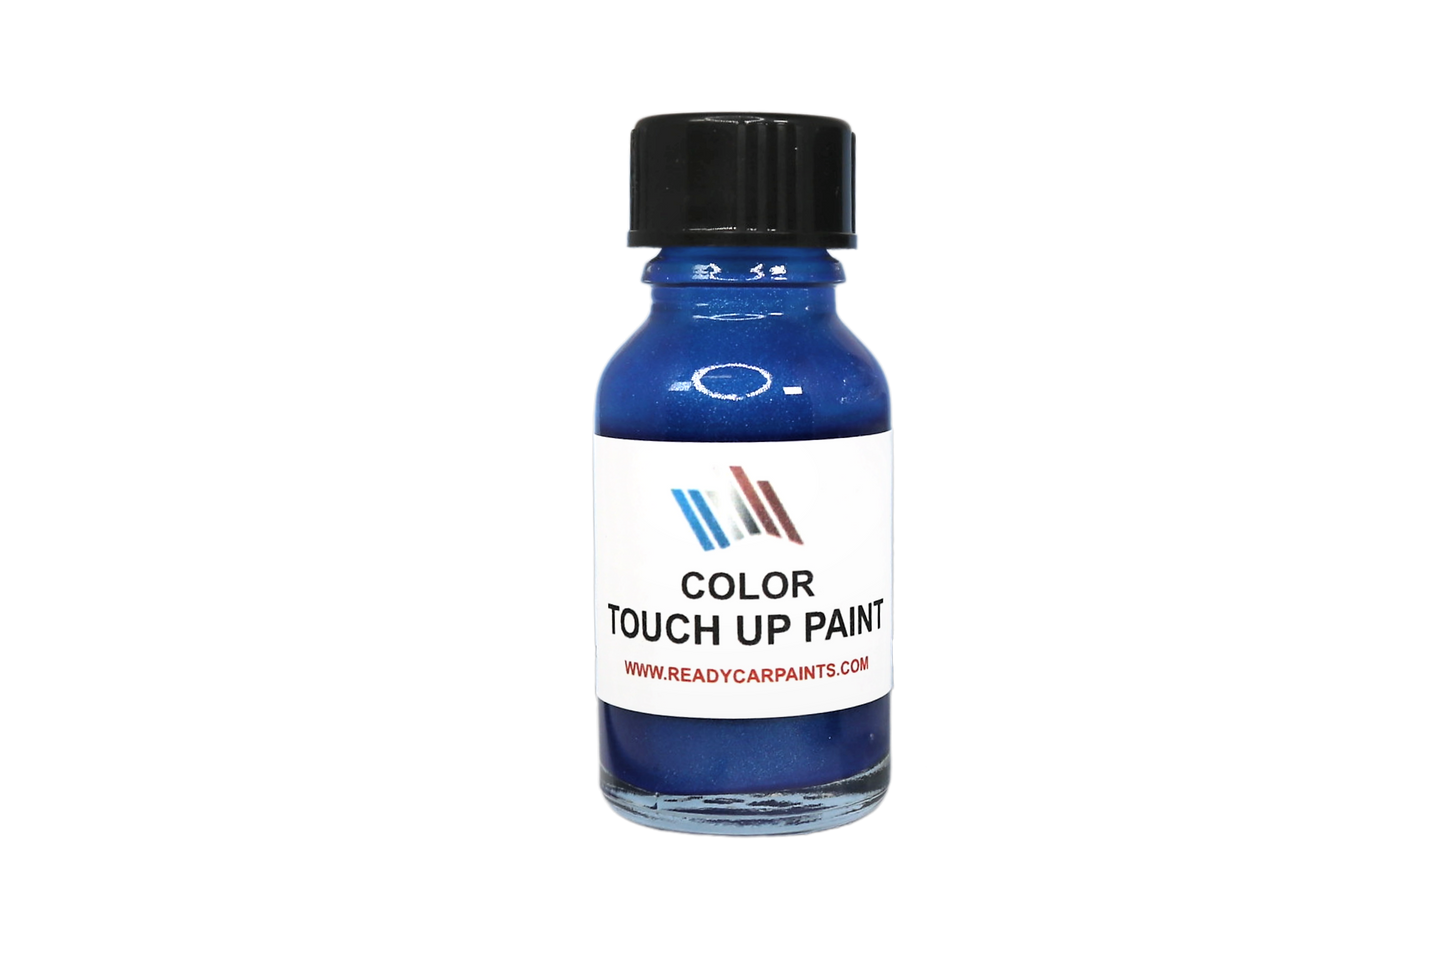 AUDI LY9F/B6 Brilliant White Touch Up Paint Kit 100% OEM Color Match